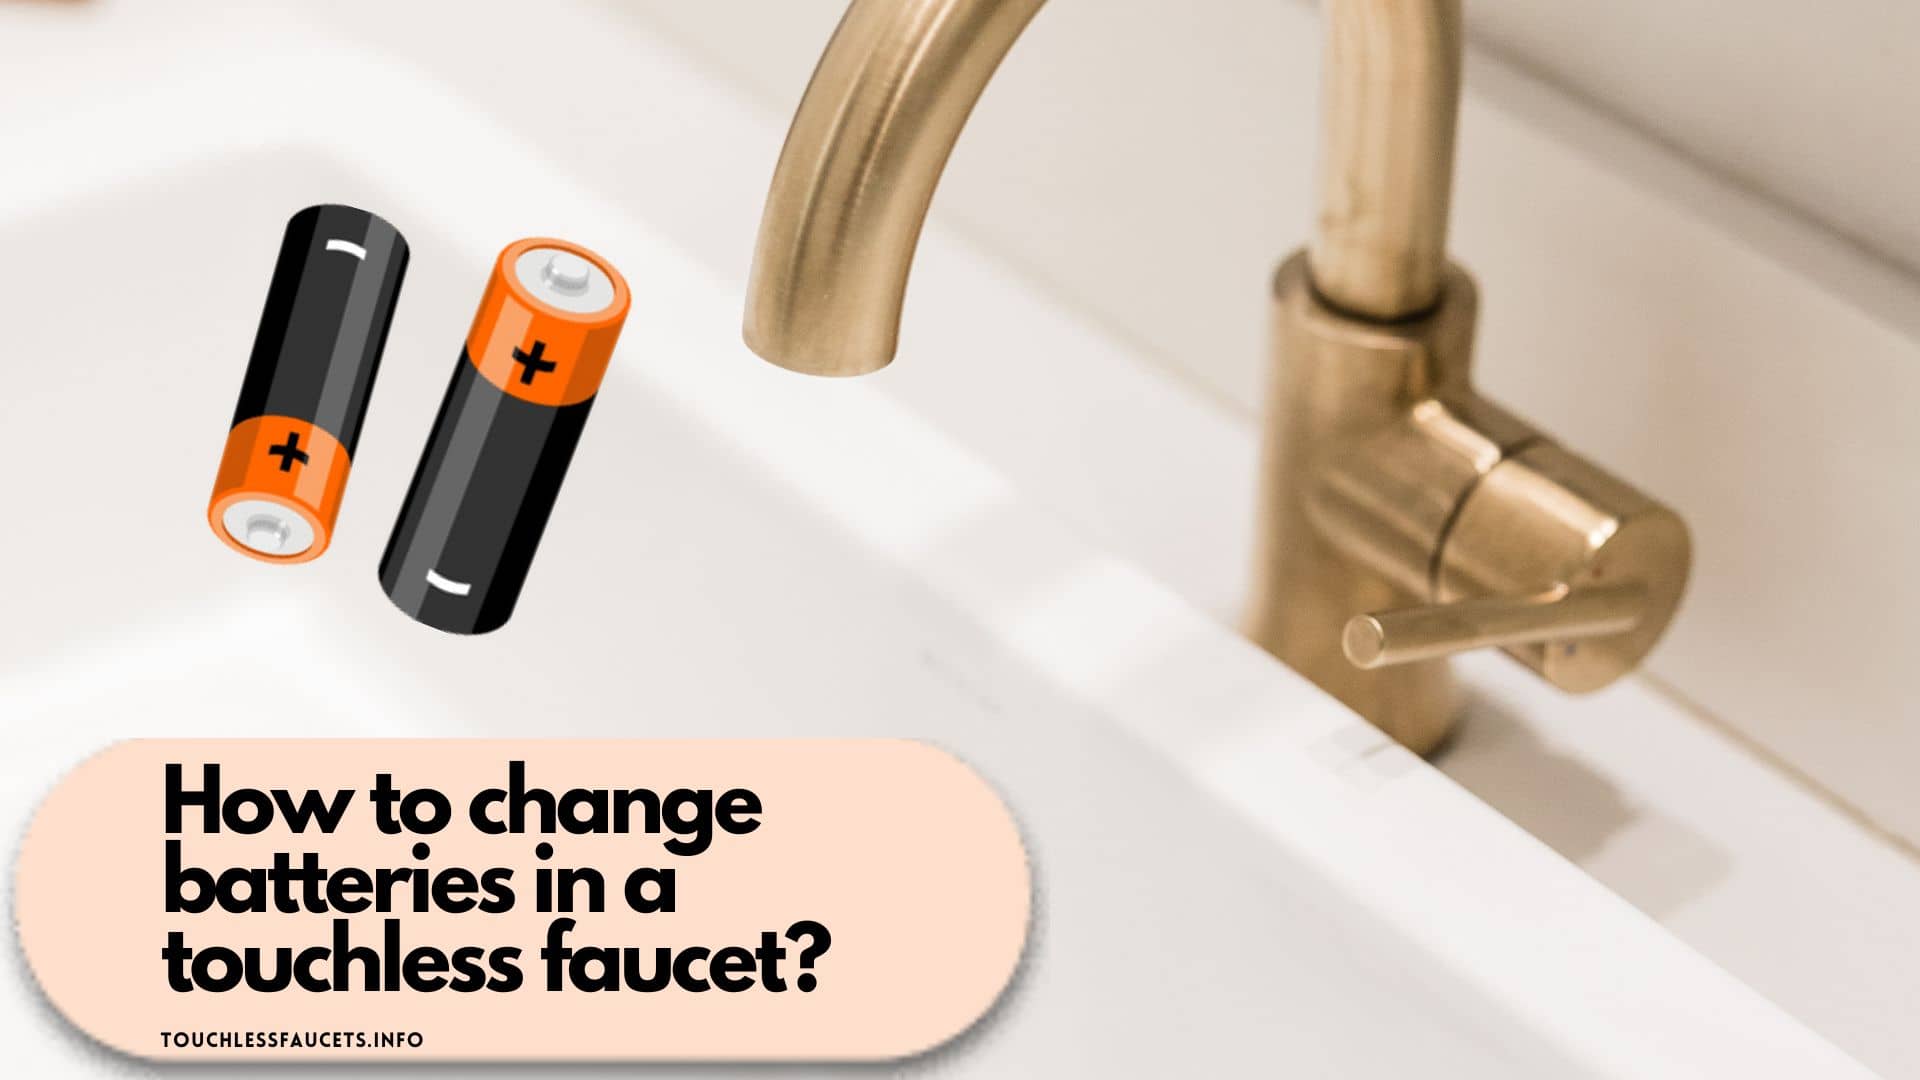 How to change batteries in a touchless faucet?